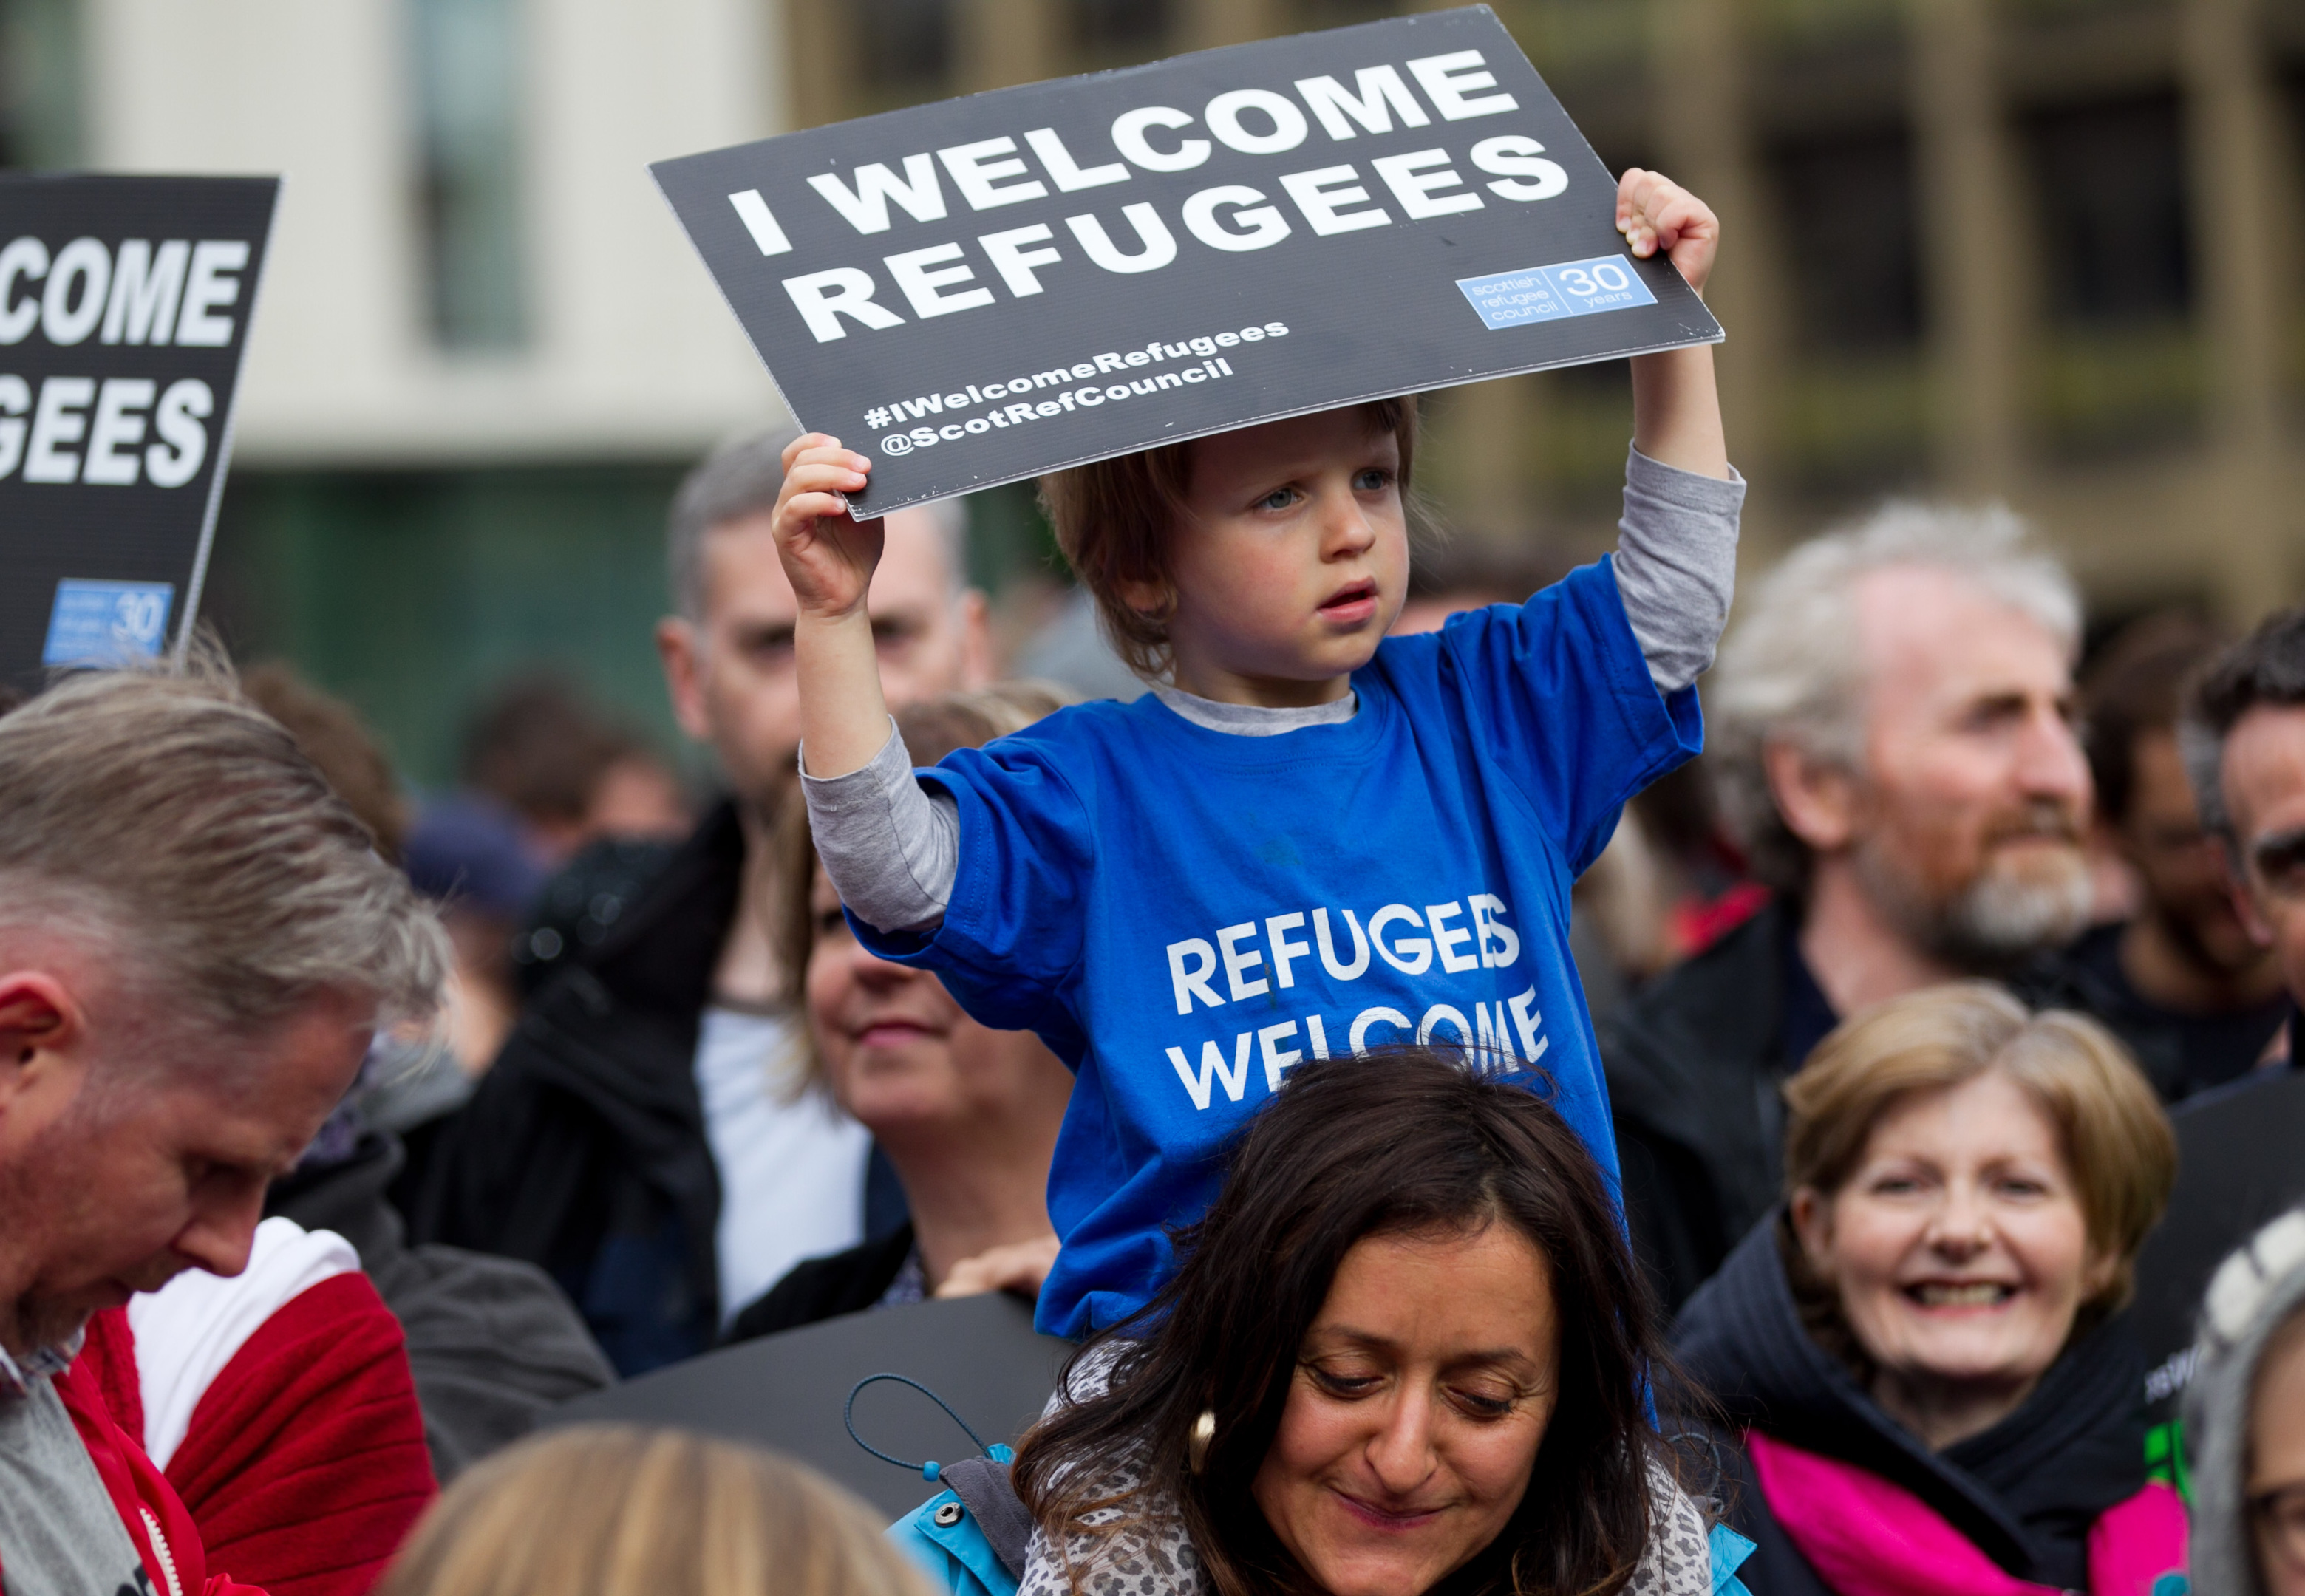 People of Glasgow show support for refugees in George Square (Andrew Cawley / DC Thomson)